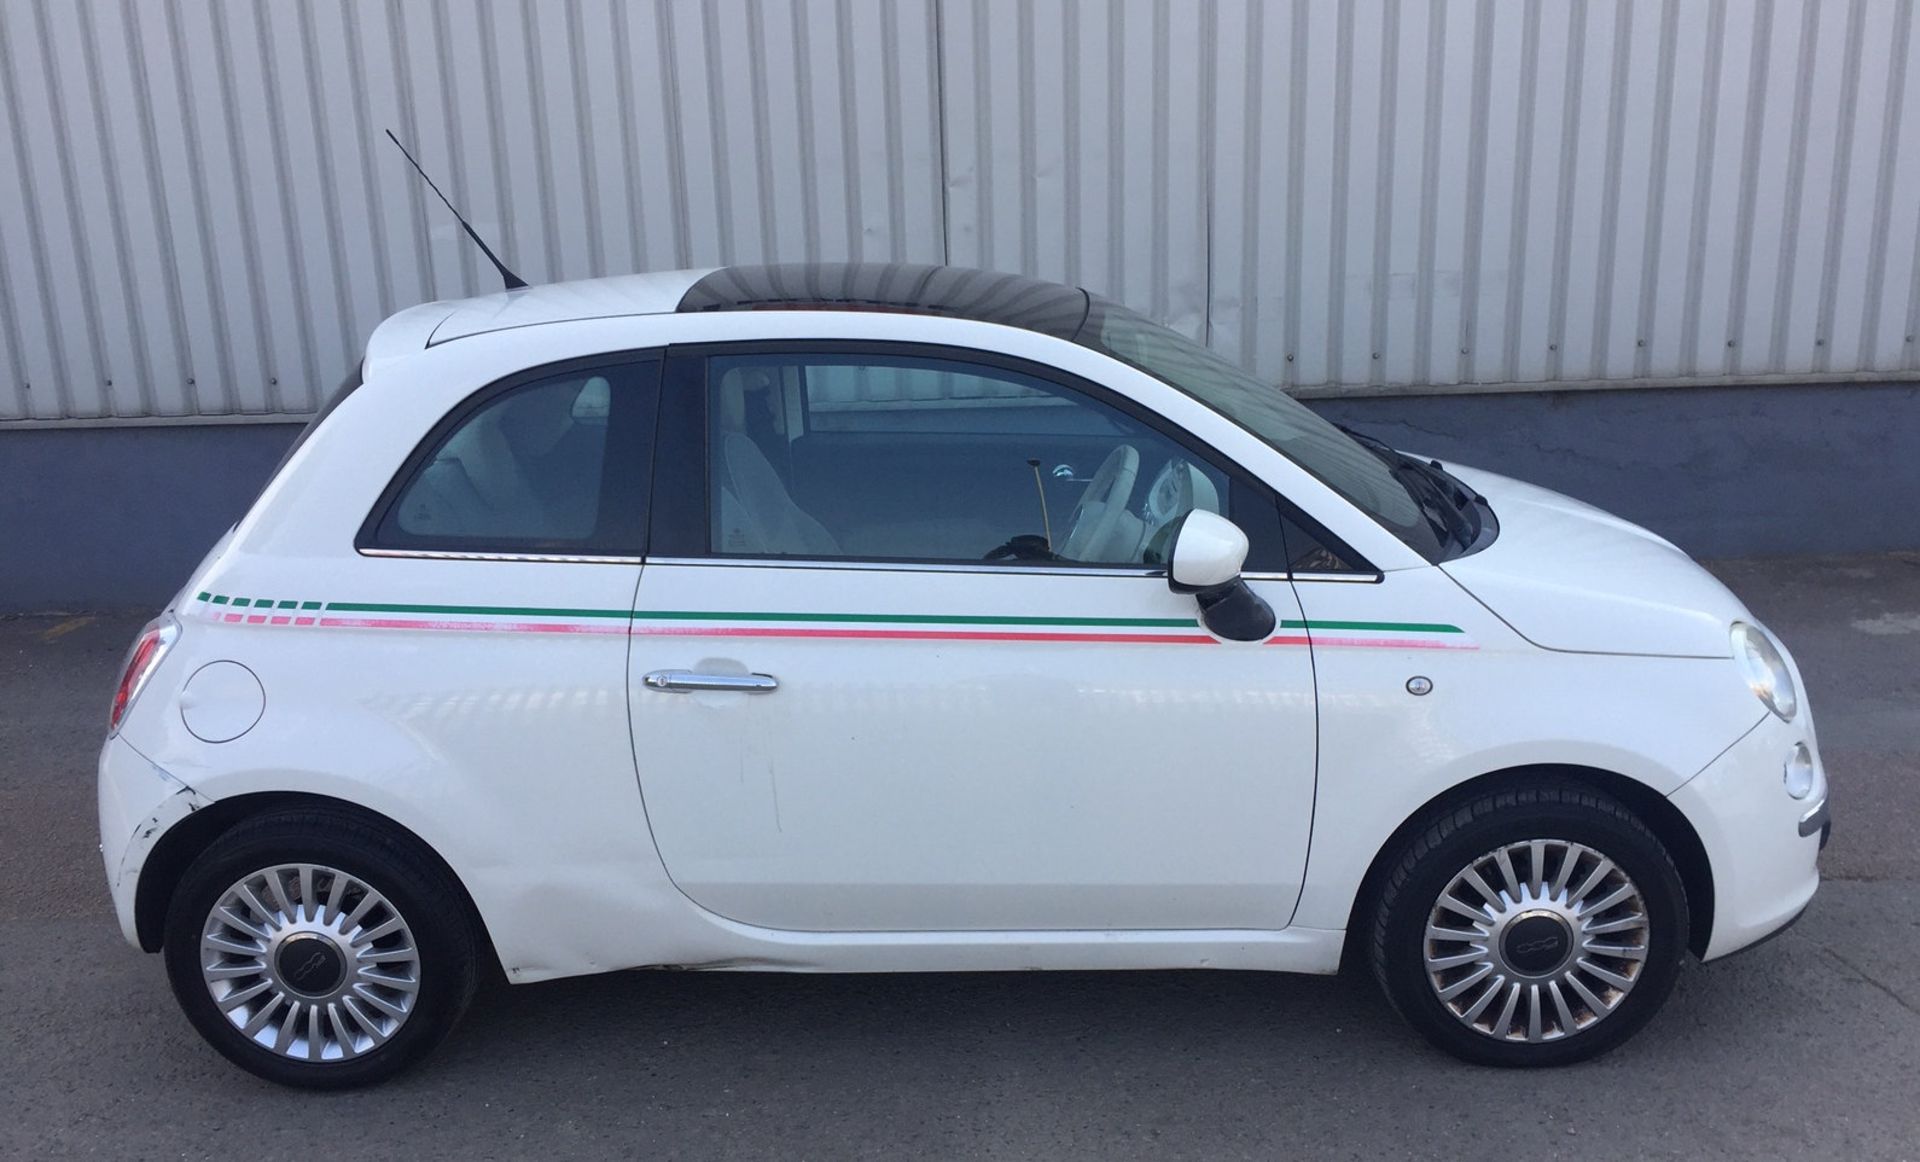 2009 Fiat 500 1.2 Lounge 3 Dr Hatchback - CL505 - NO VAT ON THE HAMMER - Location: Corby, Northampto - Image 10 of 12